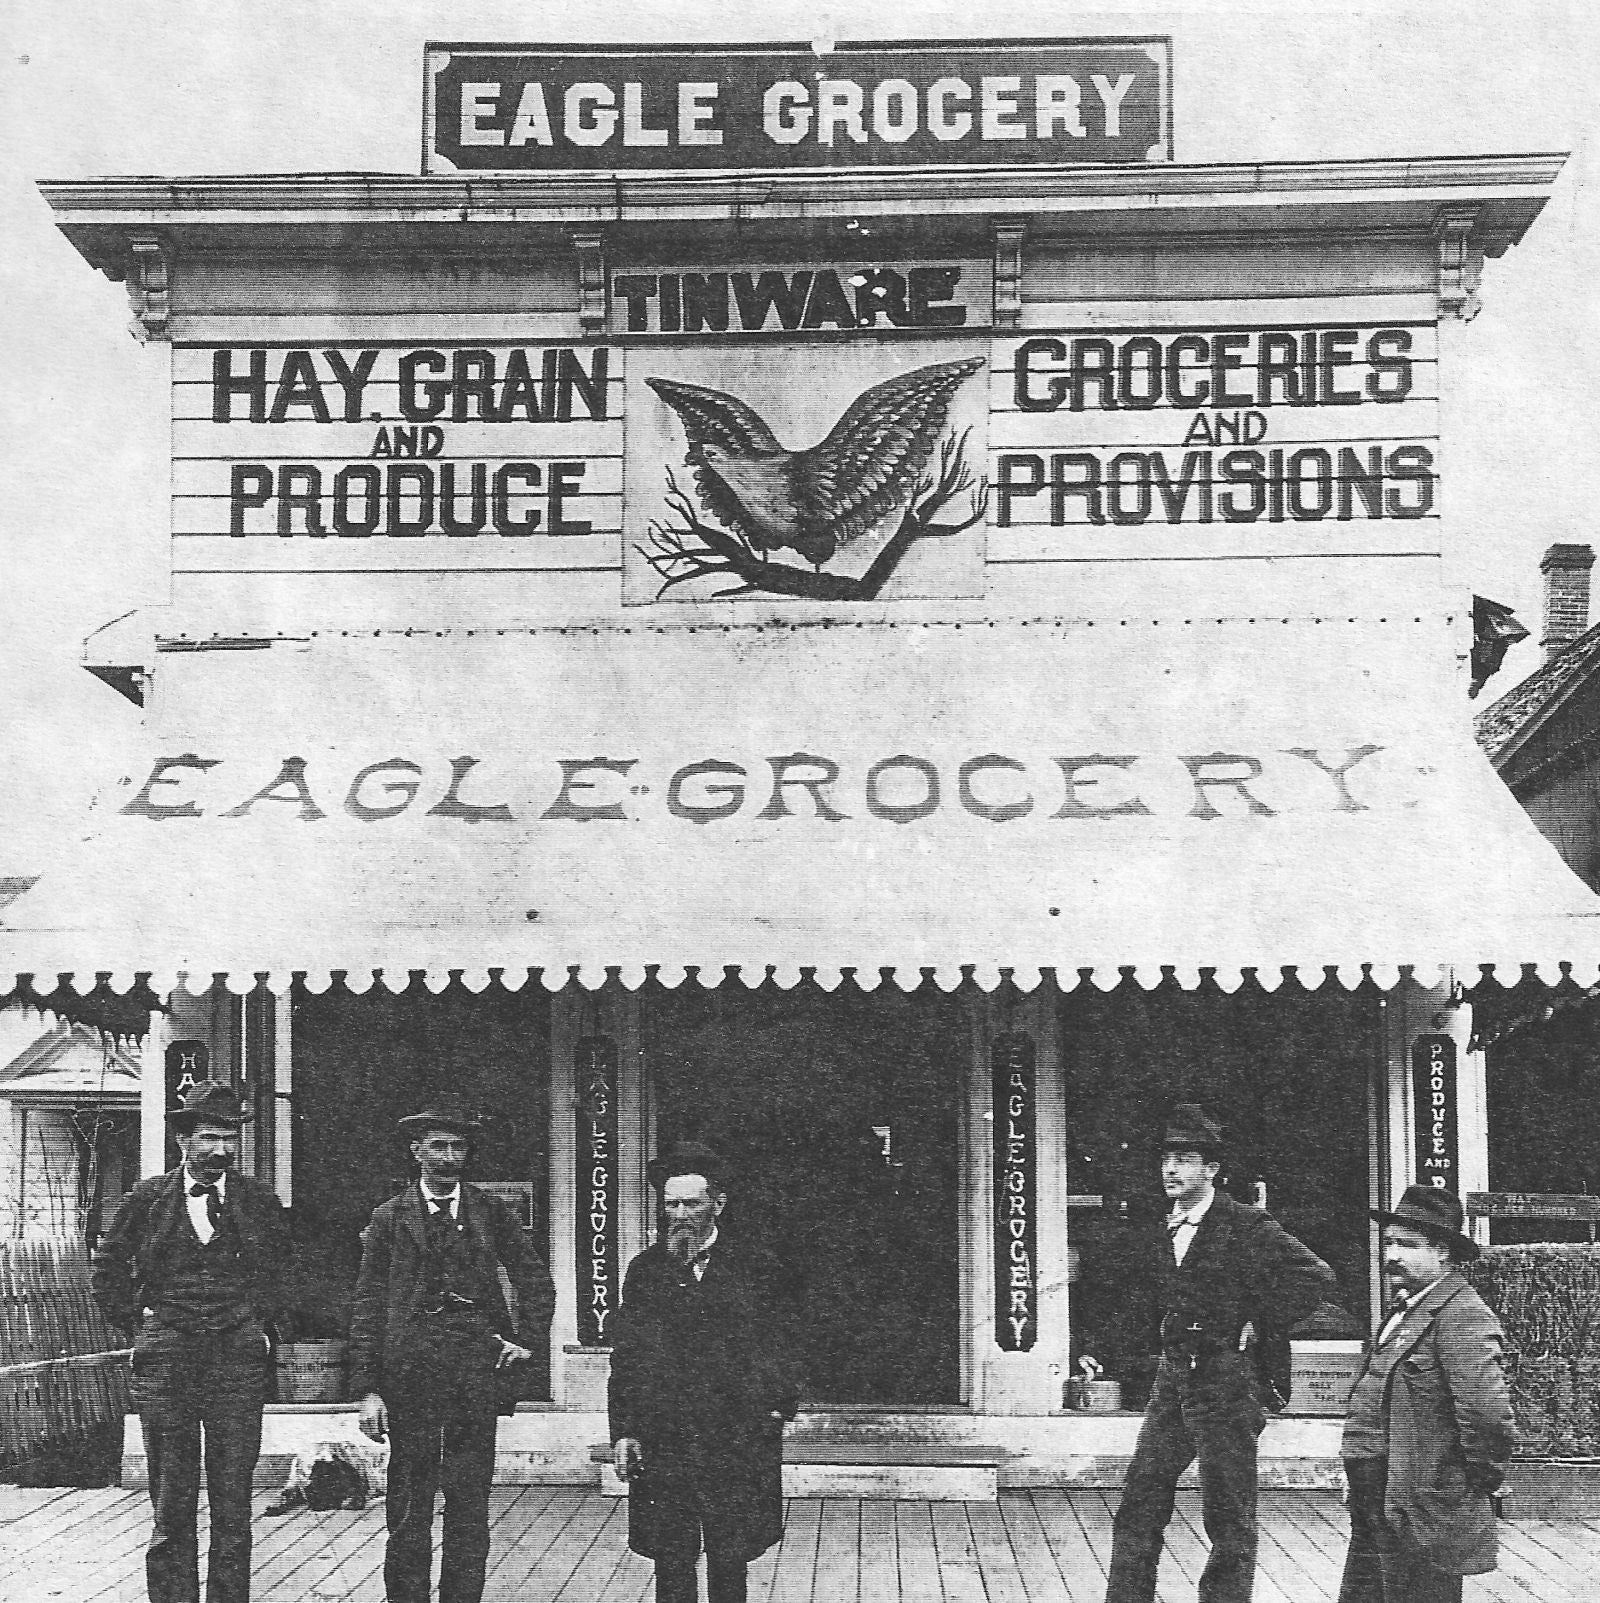 The Eagle Grocery